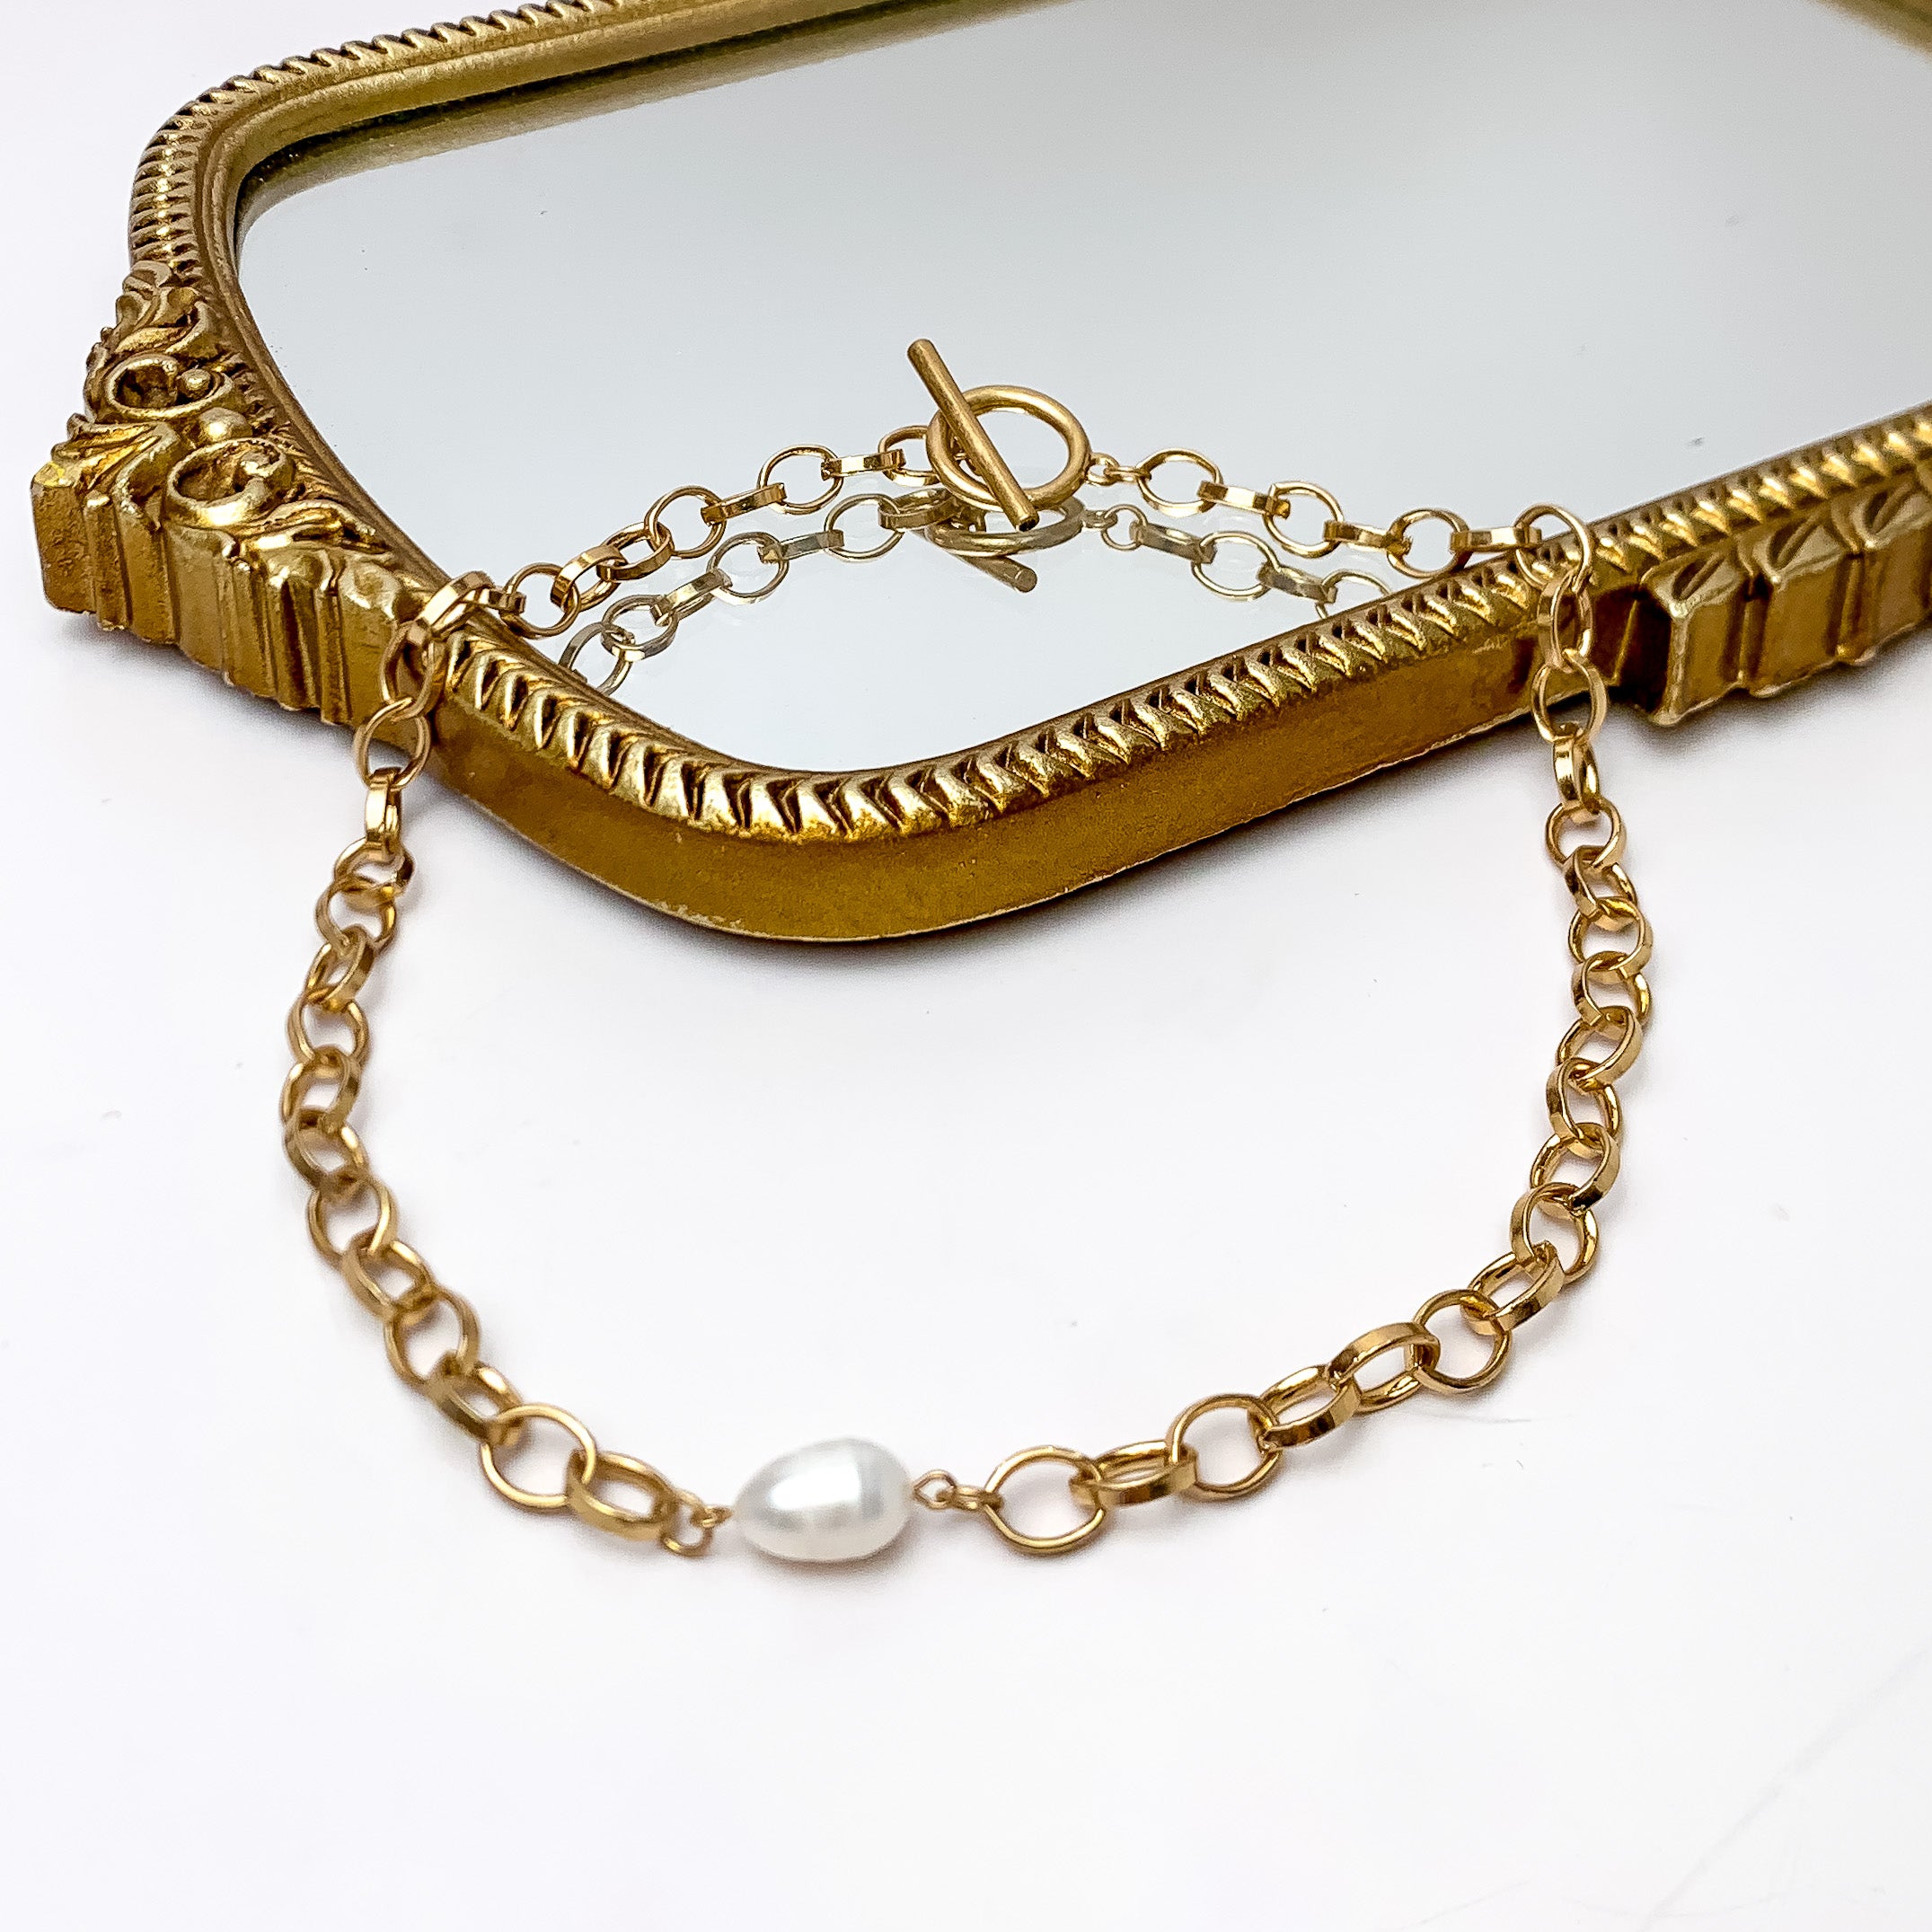 Pearl Accent Gold Tone Chain Necklace With Toggle Clasp. Pictured on a white background with part of it on a gold trimmed mirror.